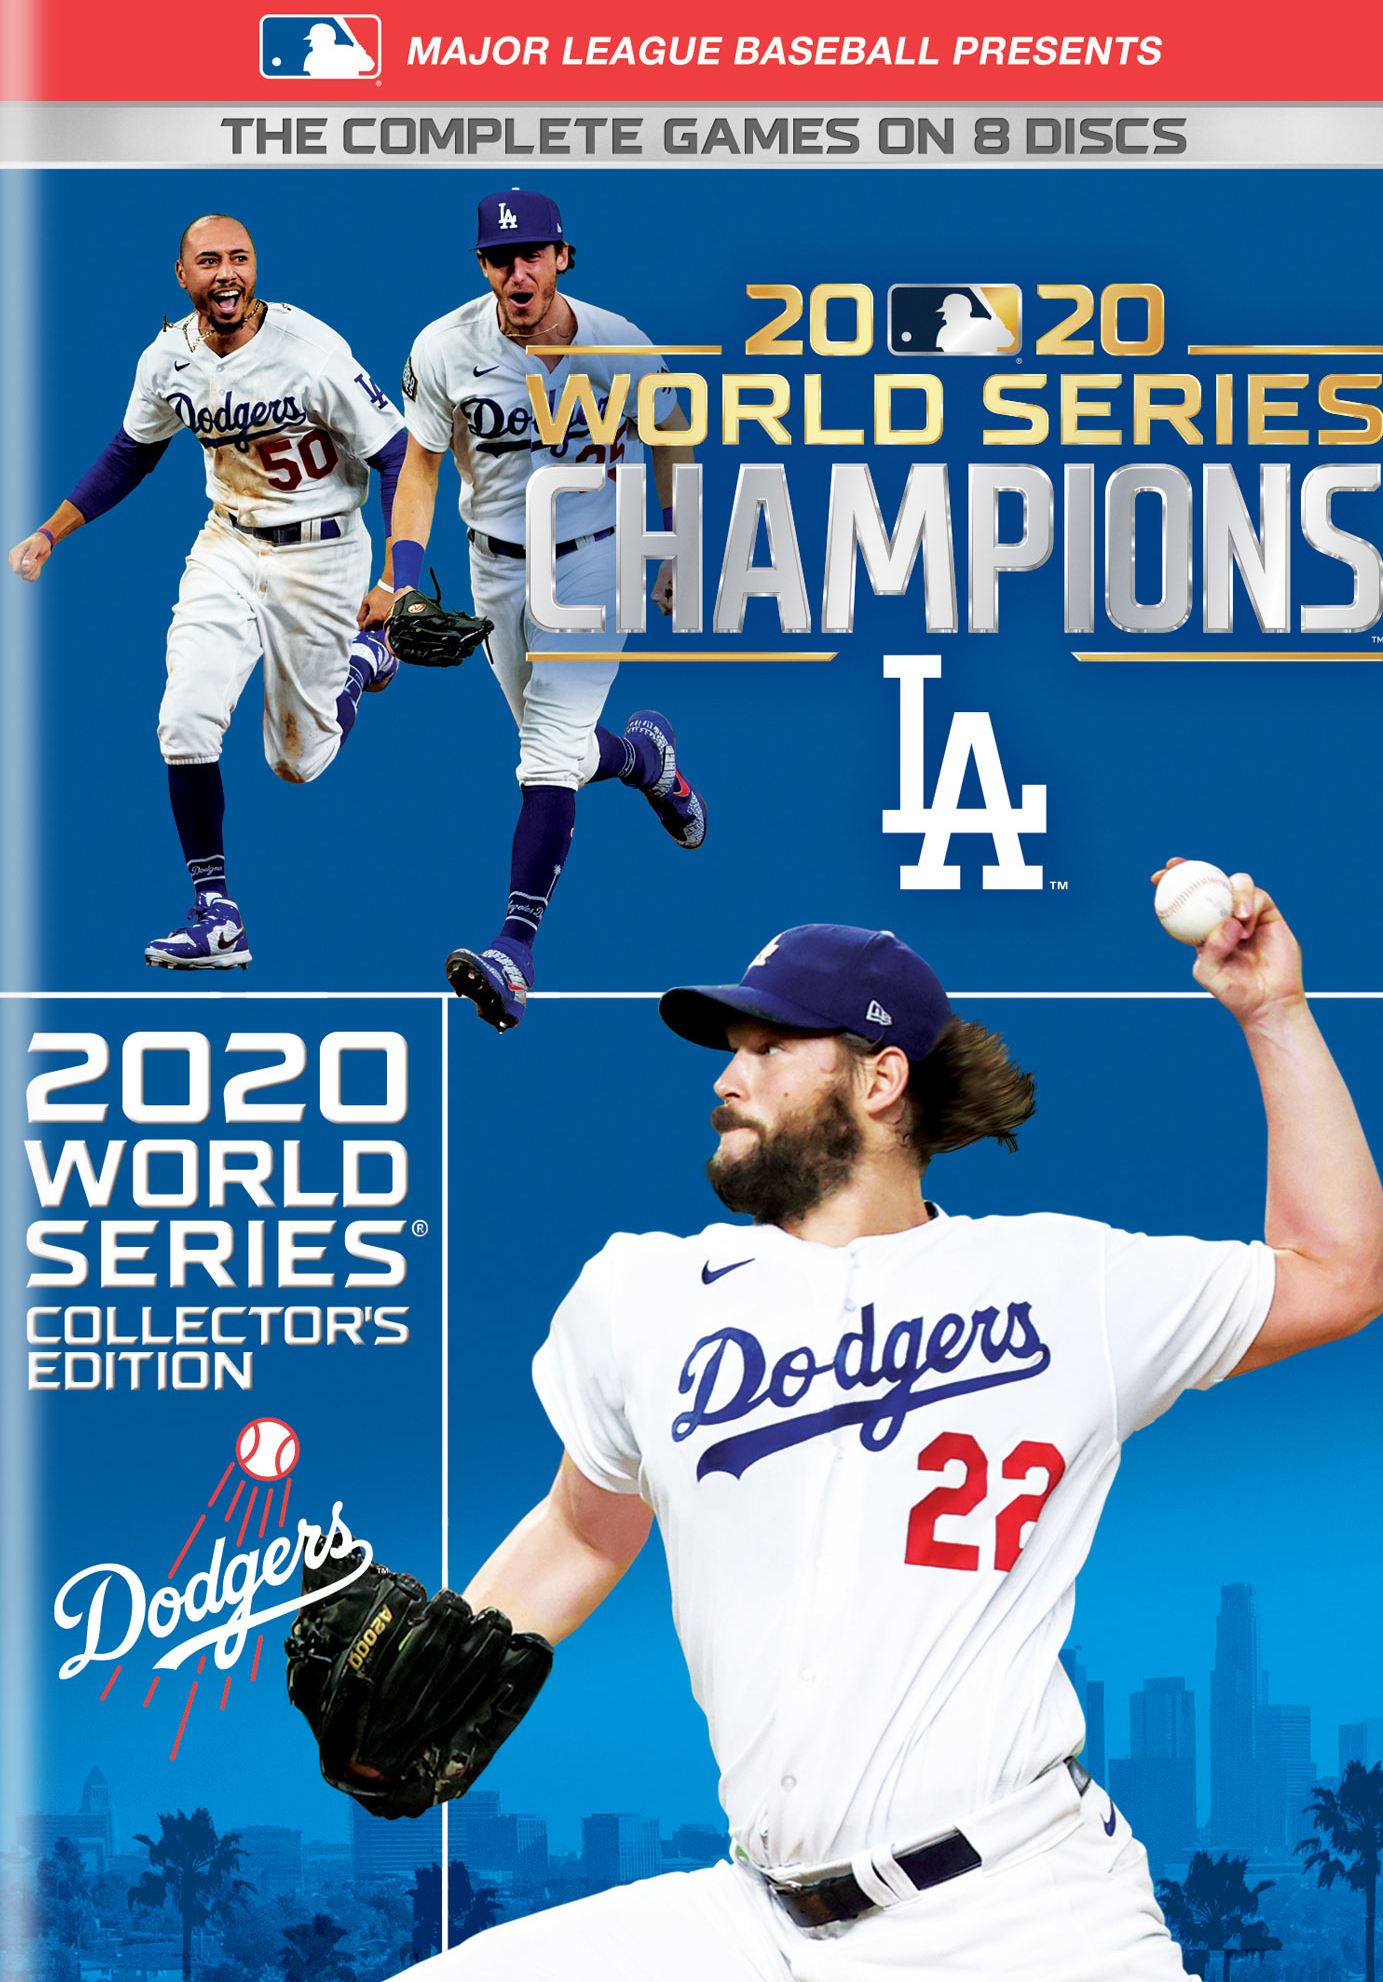 los angeles dodgers store near me